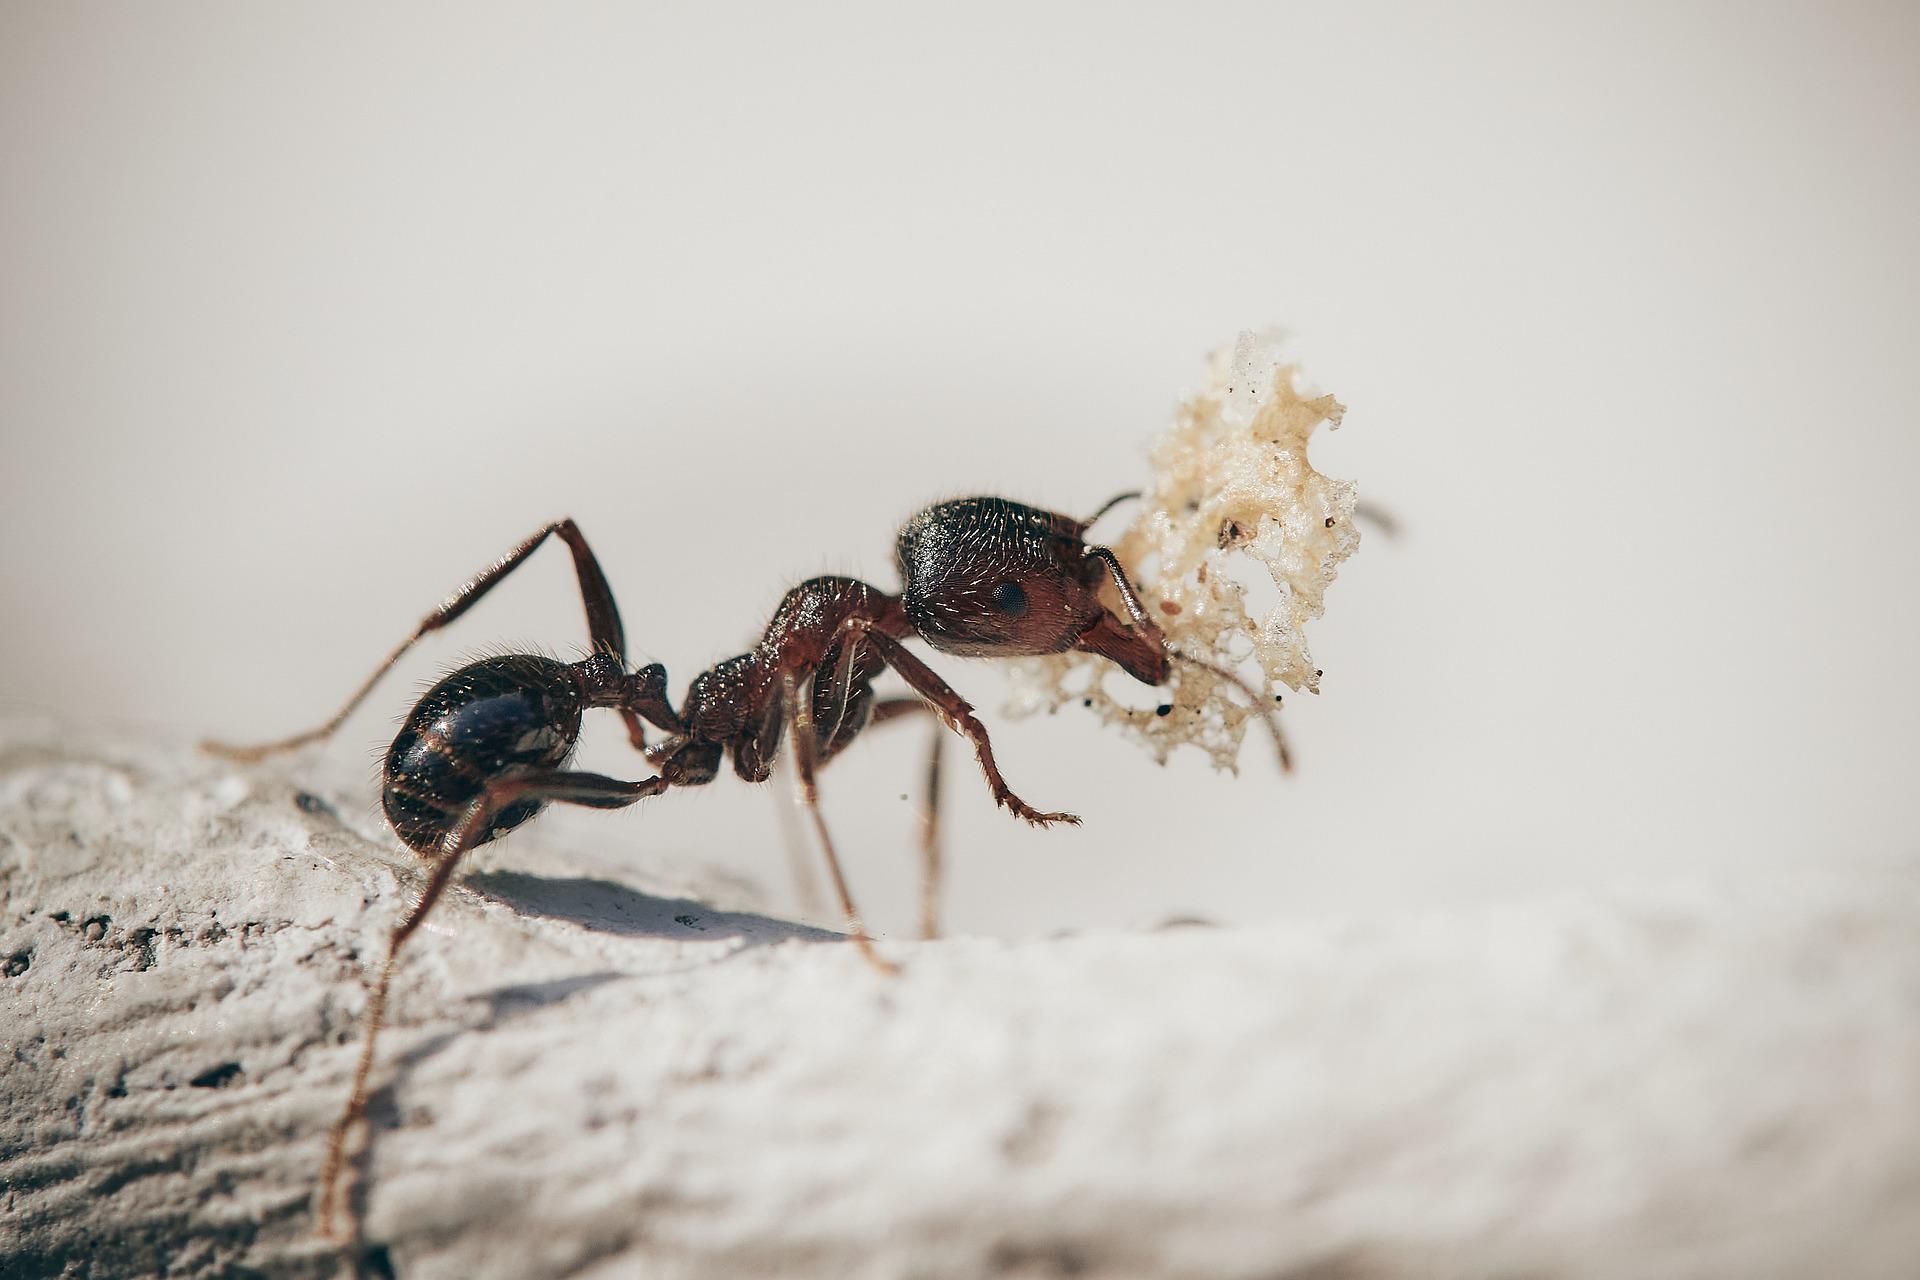 Ant Crawling on Dry Ground